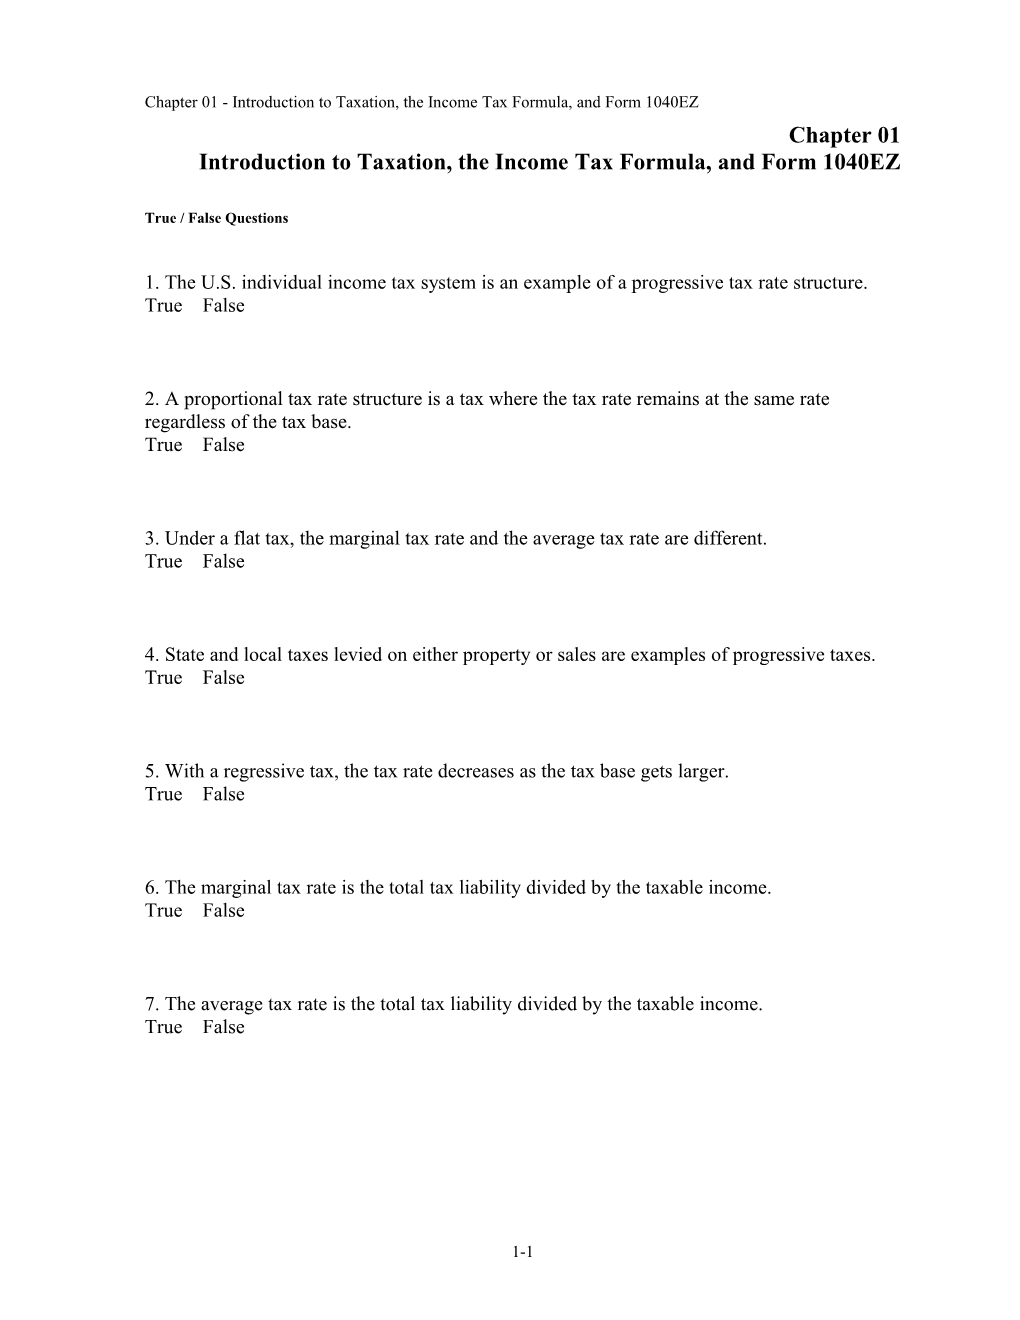 Chapter 01 Introduction to Taxation, the Income Tax Formula, and Form 1040EZ